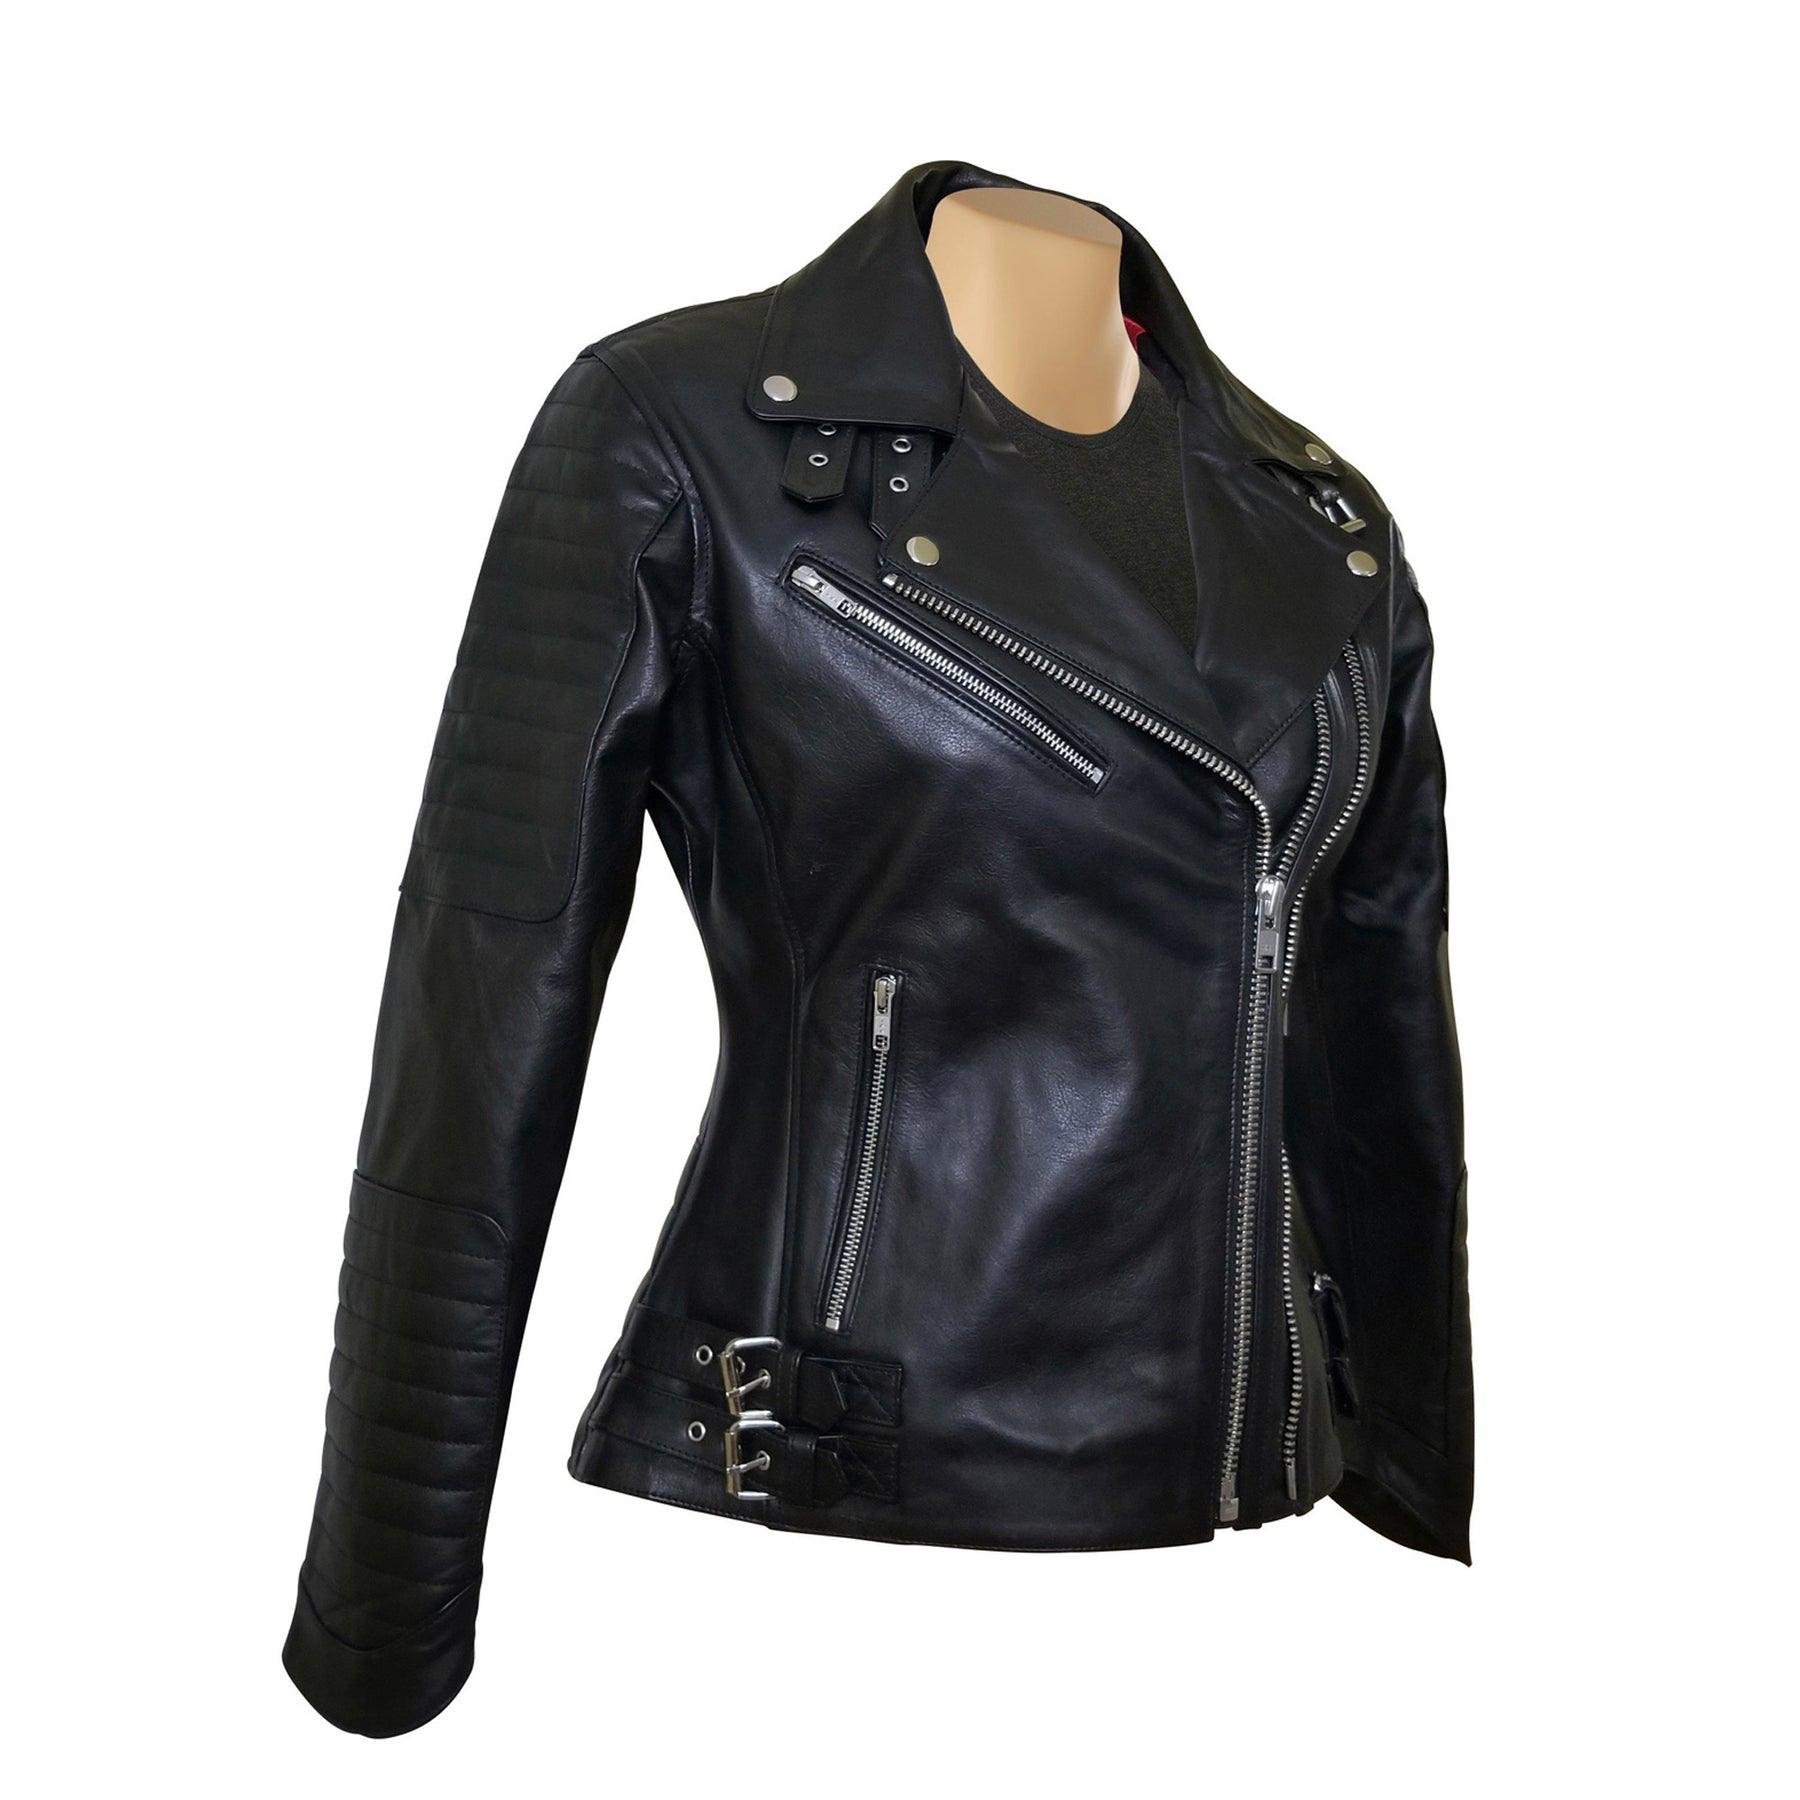 Miyah's double zipper leather jacket with ribbed stitching details ...